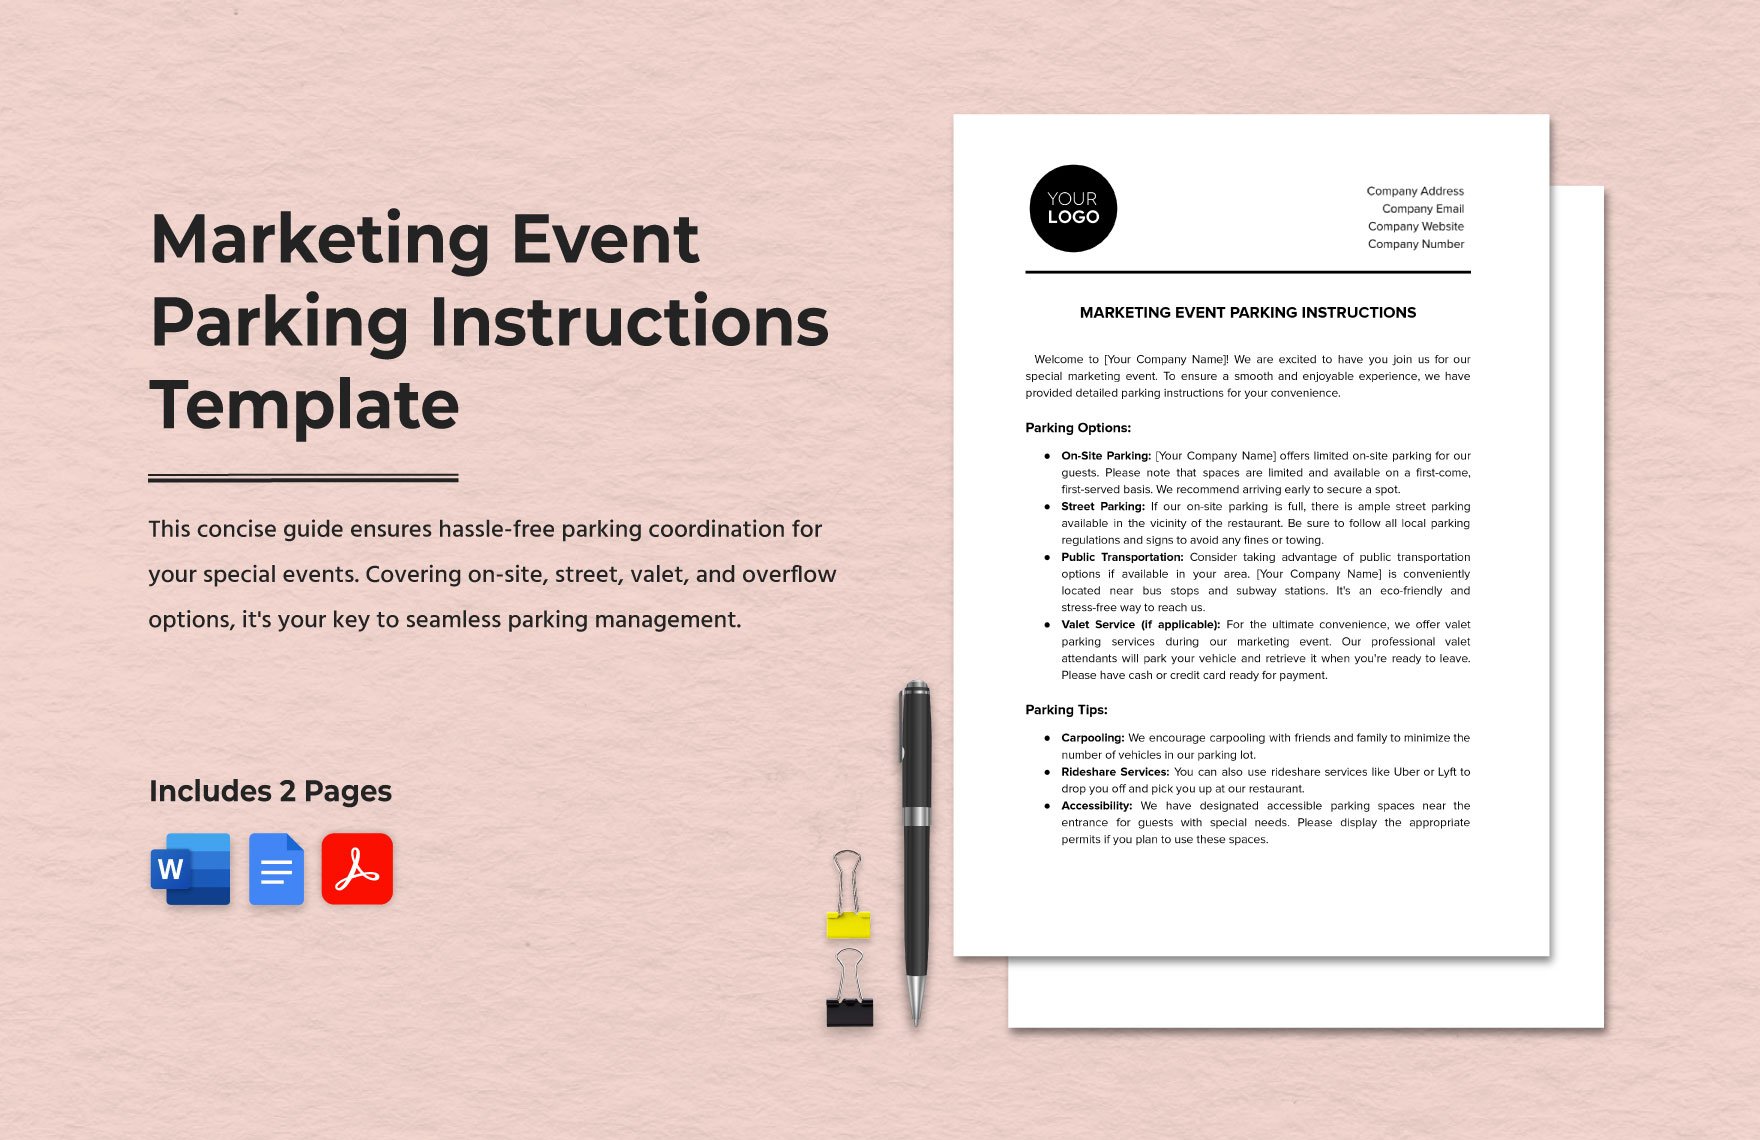 Marketing Event Parking Instructions Template in Word, Google Docs, PDF